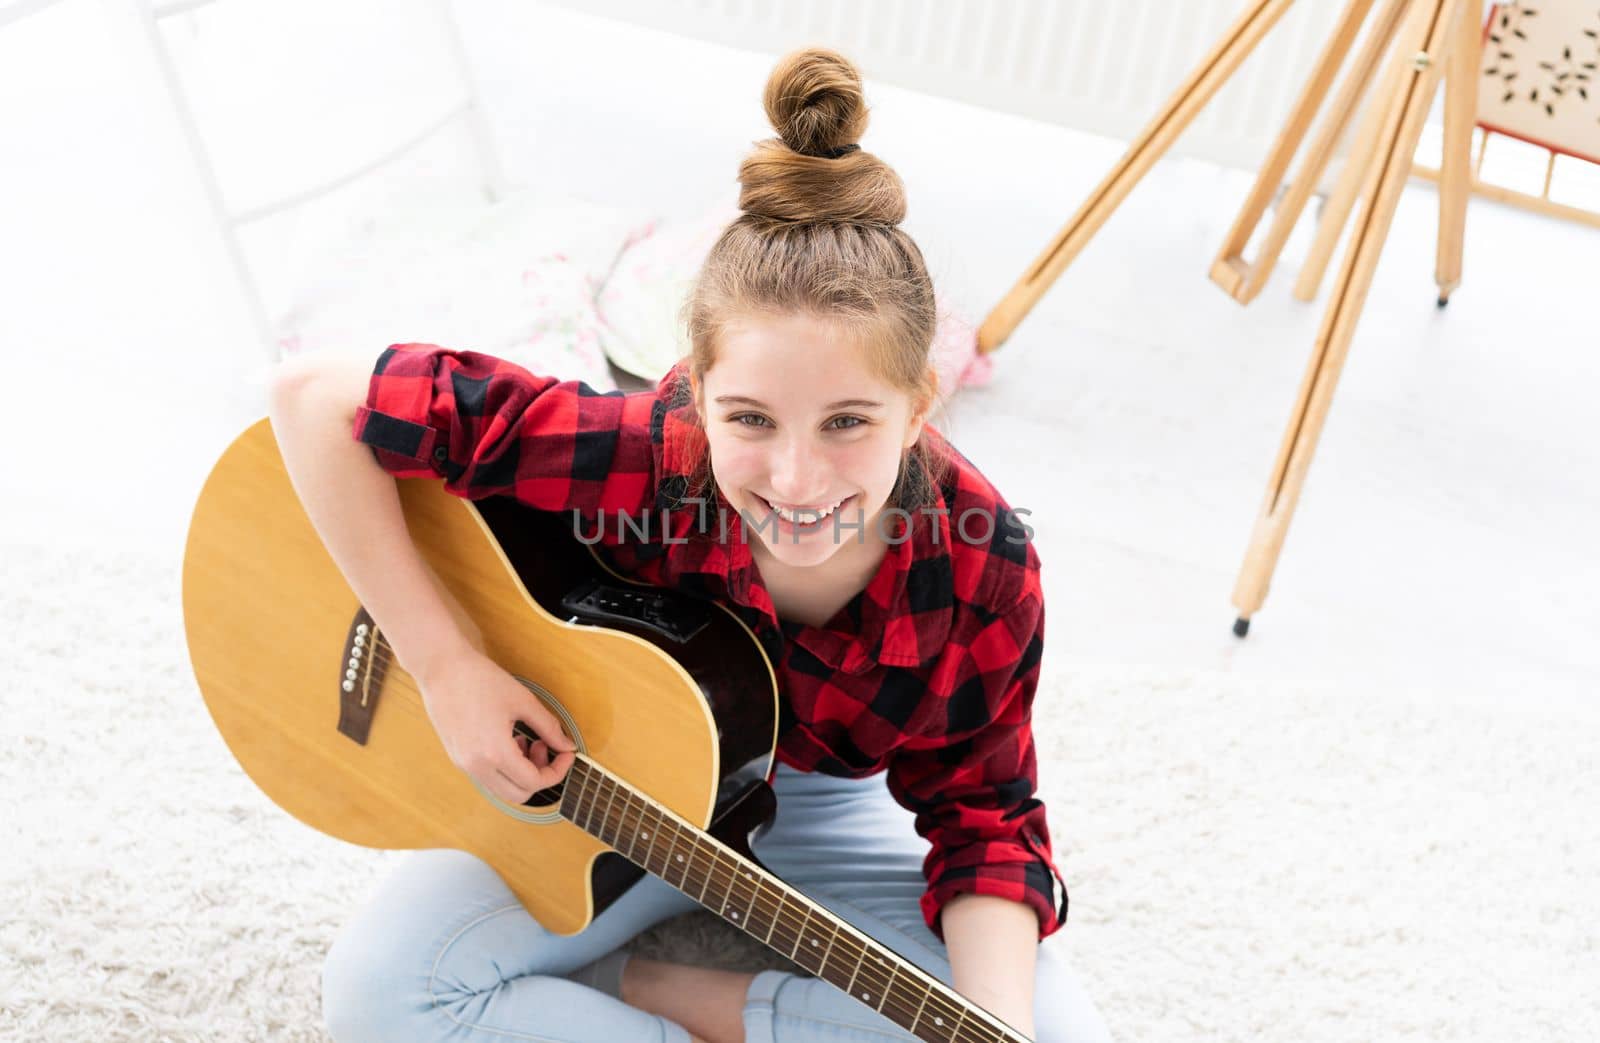 Smiling girl guitarist with musical instrument looking up from floor